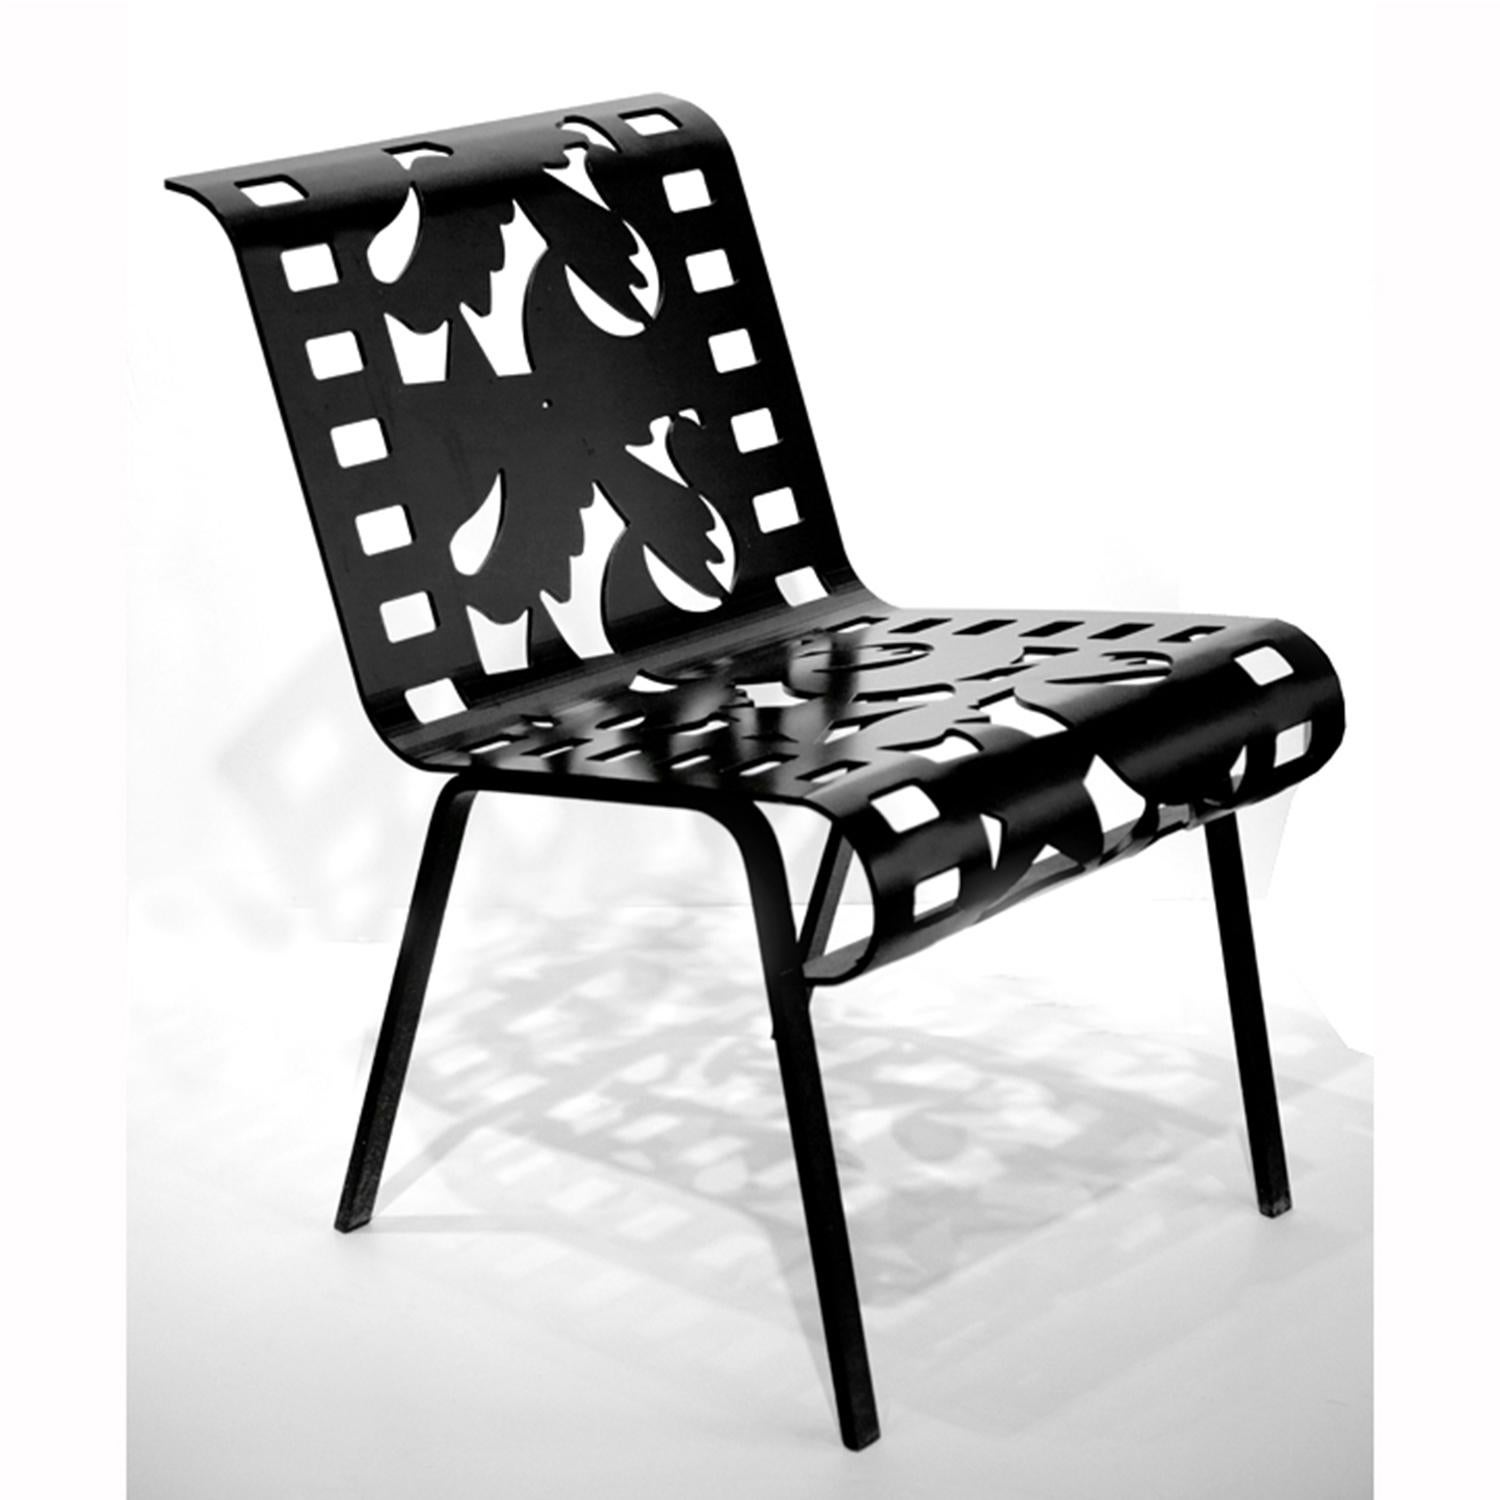 Lucia Eames Figurative Sculpture - Chairs from Cutting Room Floor Series - Black  5/48